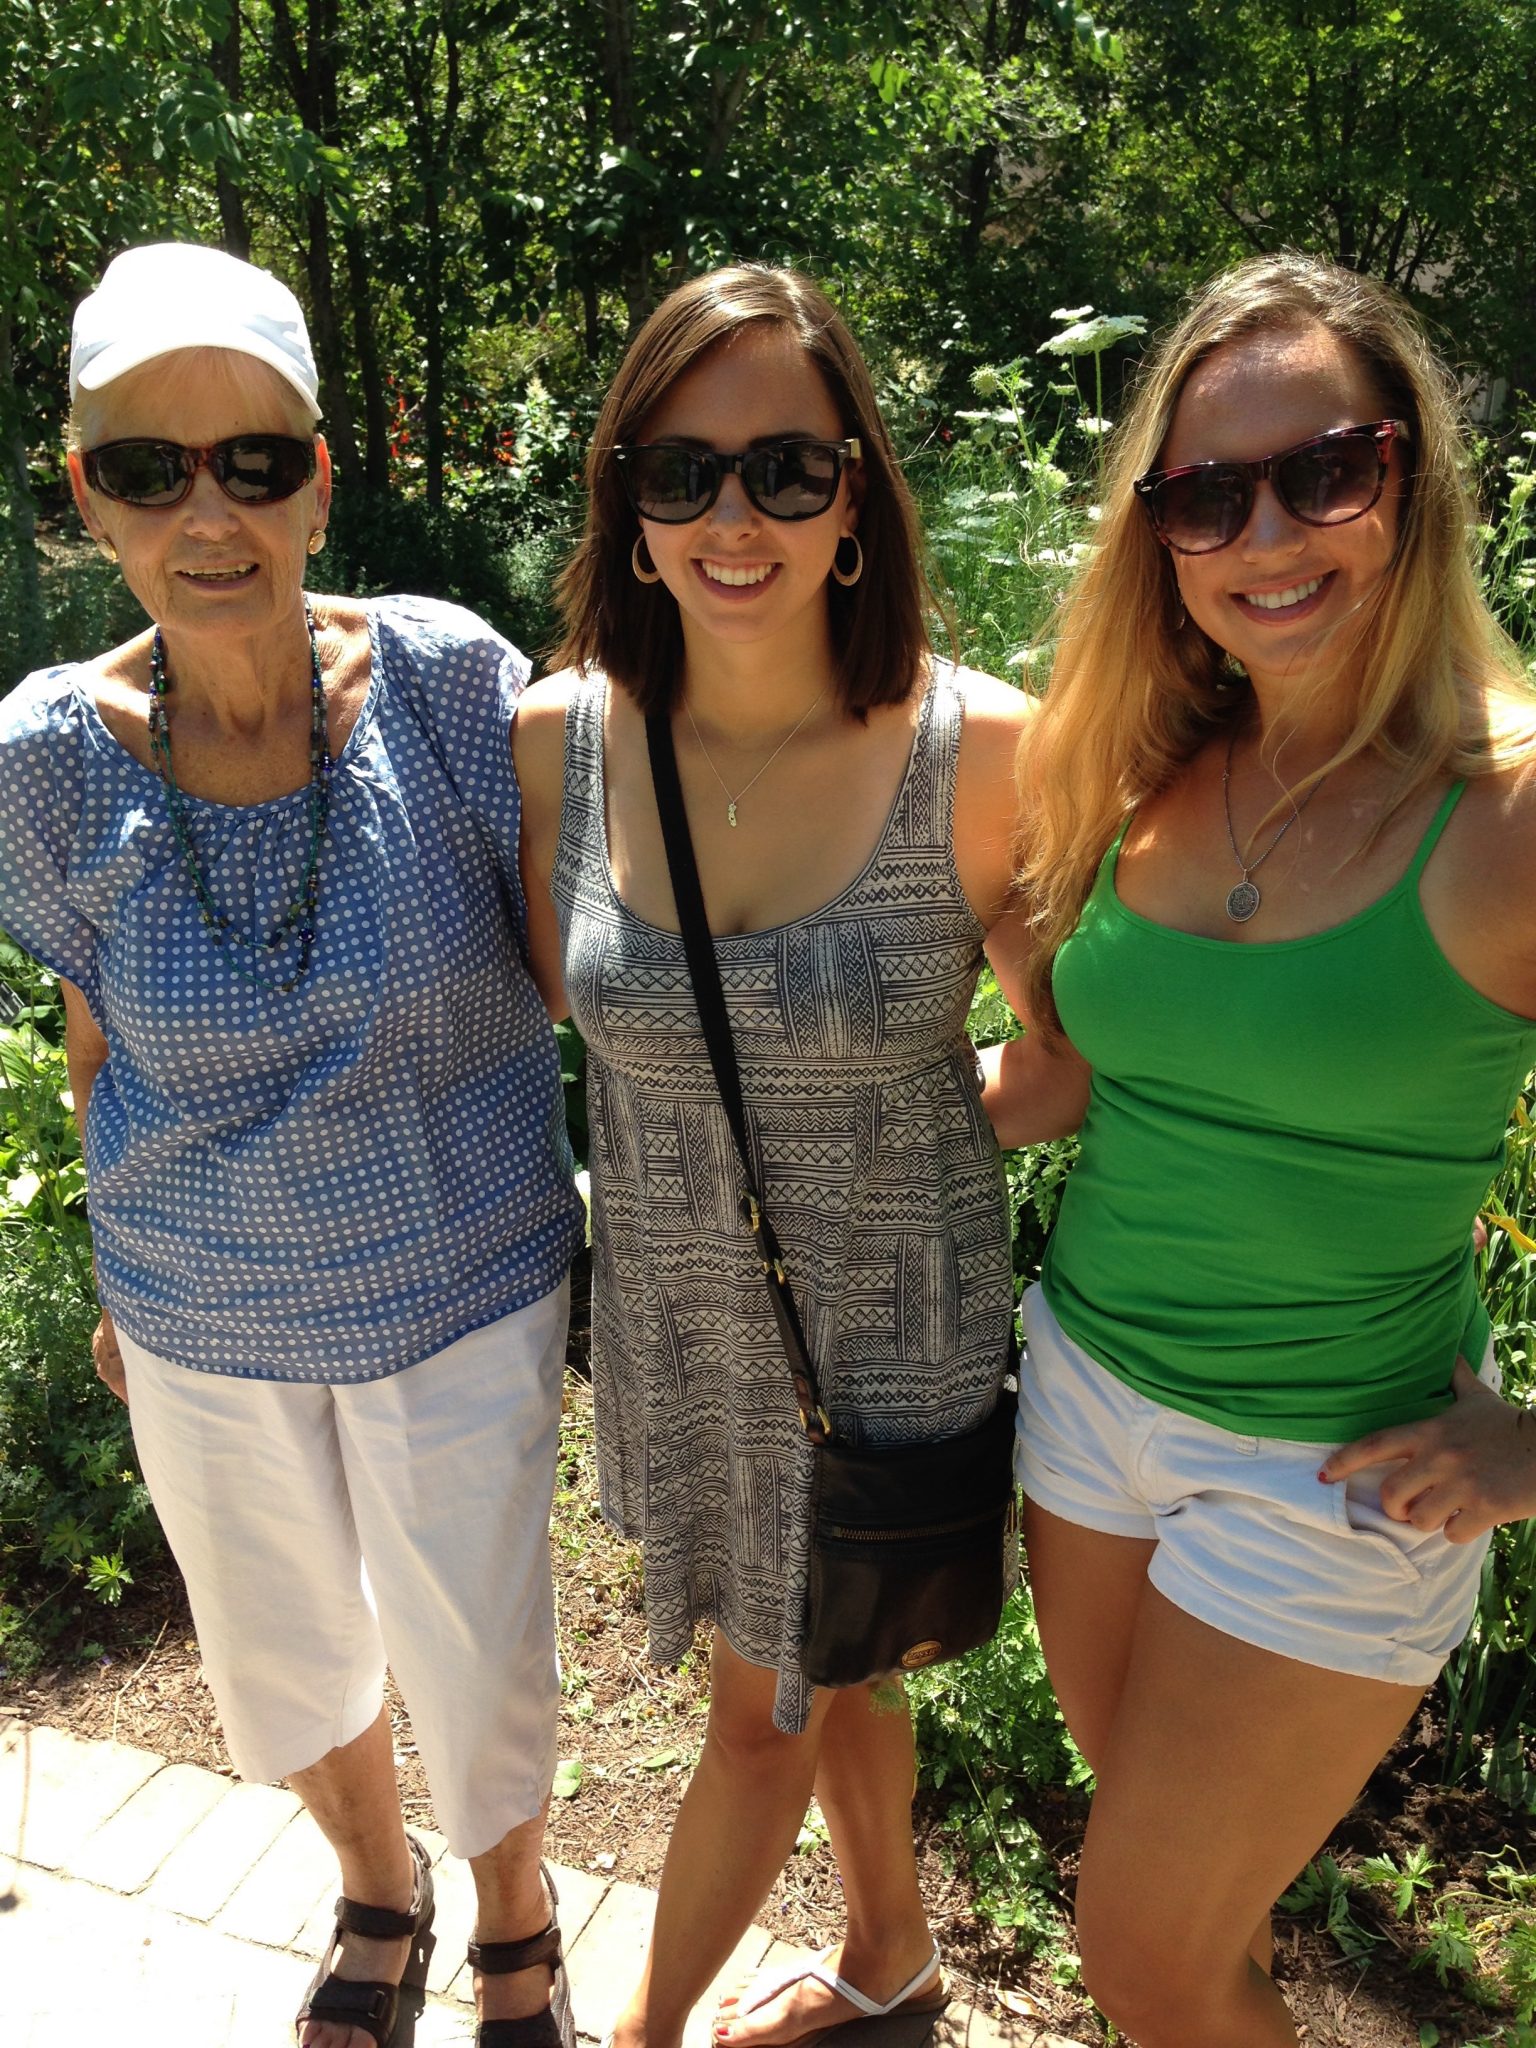 Oma and her granddaughters at the Botanic Gardens